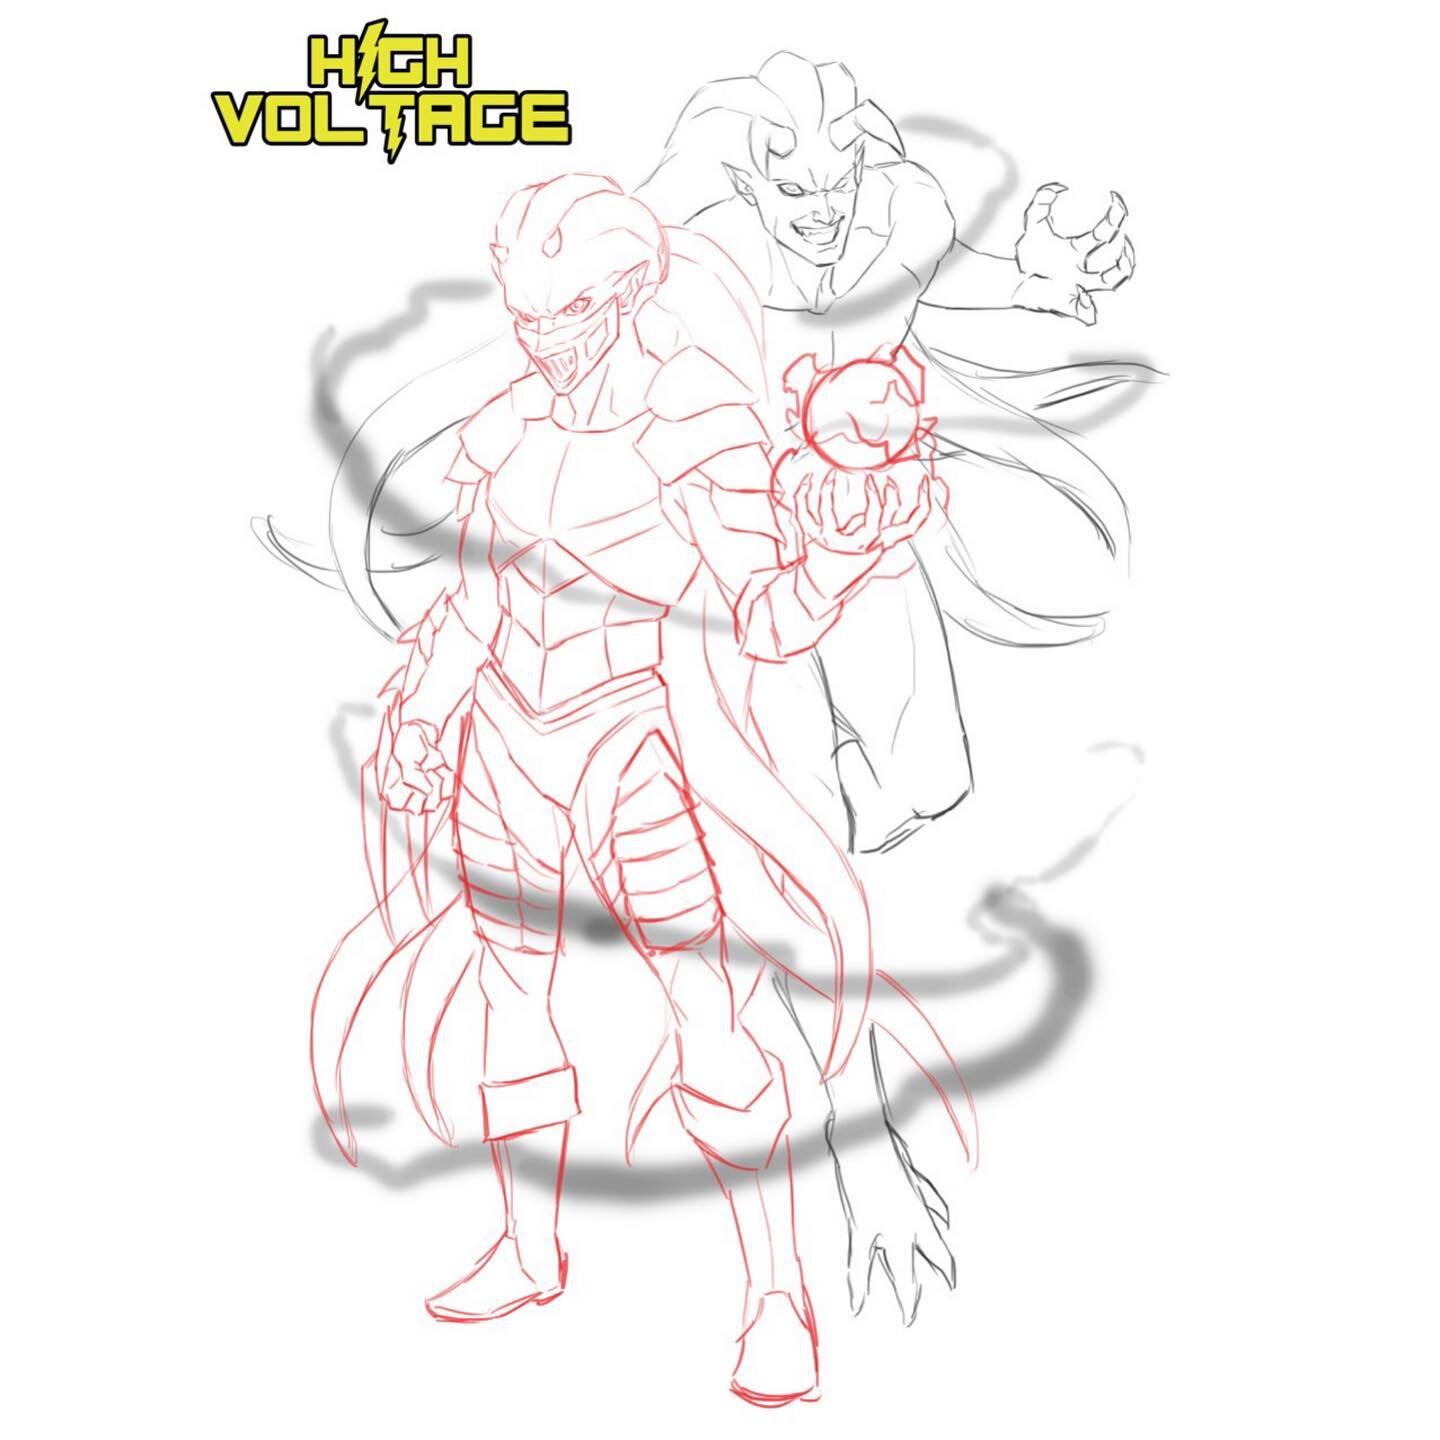 Now things are really heating up! This is just a sketch of what&rsquo;s to come. These are the villains of season 4... Xeis and Xandross. This is what Wire (the main hero of High Voltage) has been working up towards. This is a destined battle between